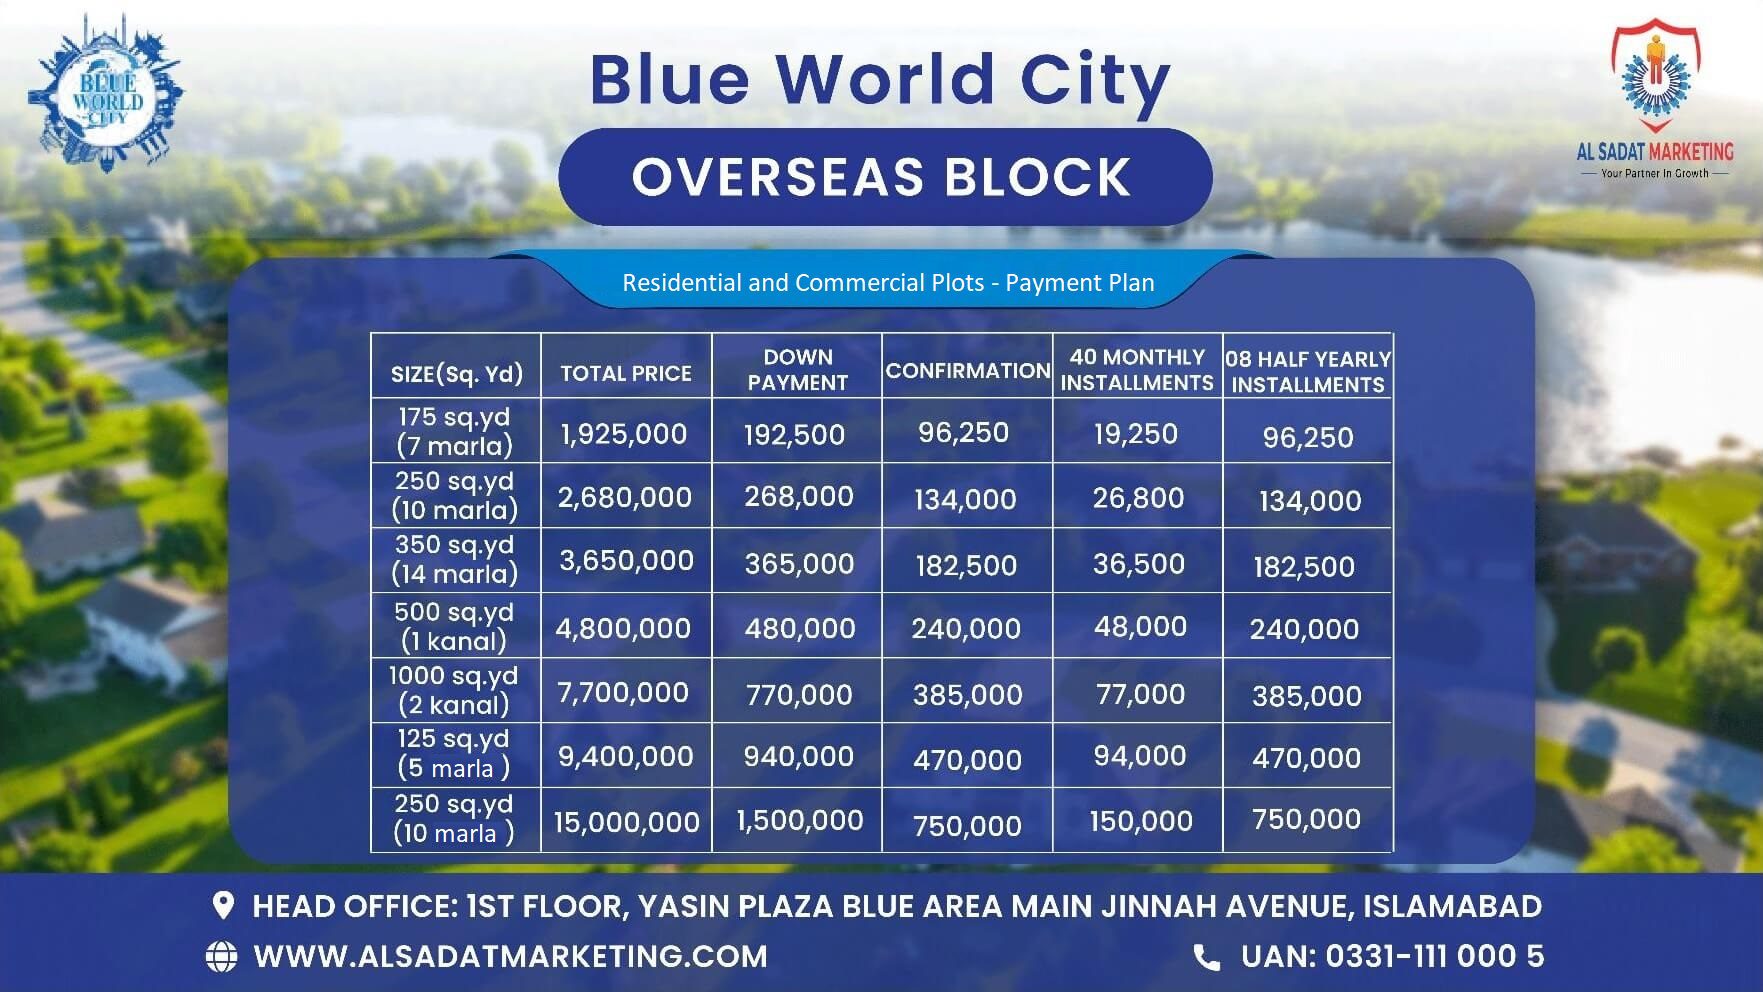 blue world city overseas block residential and commercial plots old payment plan – blue world city islamabad overseas block residential and commercial plots old payment plan – blue world city rawalpindi overseas block residential and commercial plots old payment plan – blue world city overseas block payment plan – blue world city islamabad overseas block payment plan – blue world city rawalpindi overseas block payment plan – blue world city payment plan – blue world city islamabad payment plan - blue world city rawalpindi payment plan – blue world city– blue world city islamabad – blue world city rawalpindi– blue world city housing society – blue world city islamabad housing society – blue world city real estate project – blue world city islamabad real estate project - al sadat marketing - alsadat marketing - al-sadat marketing